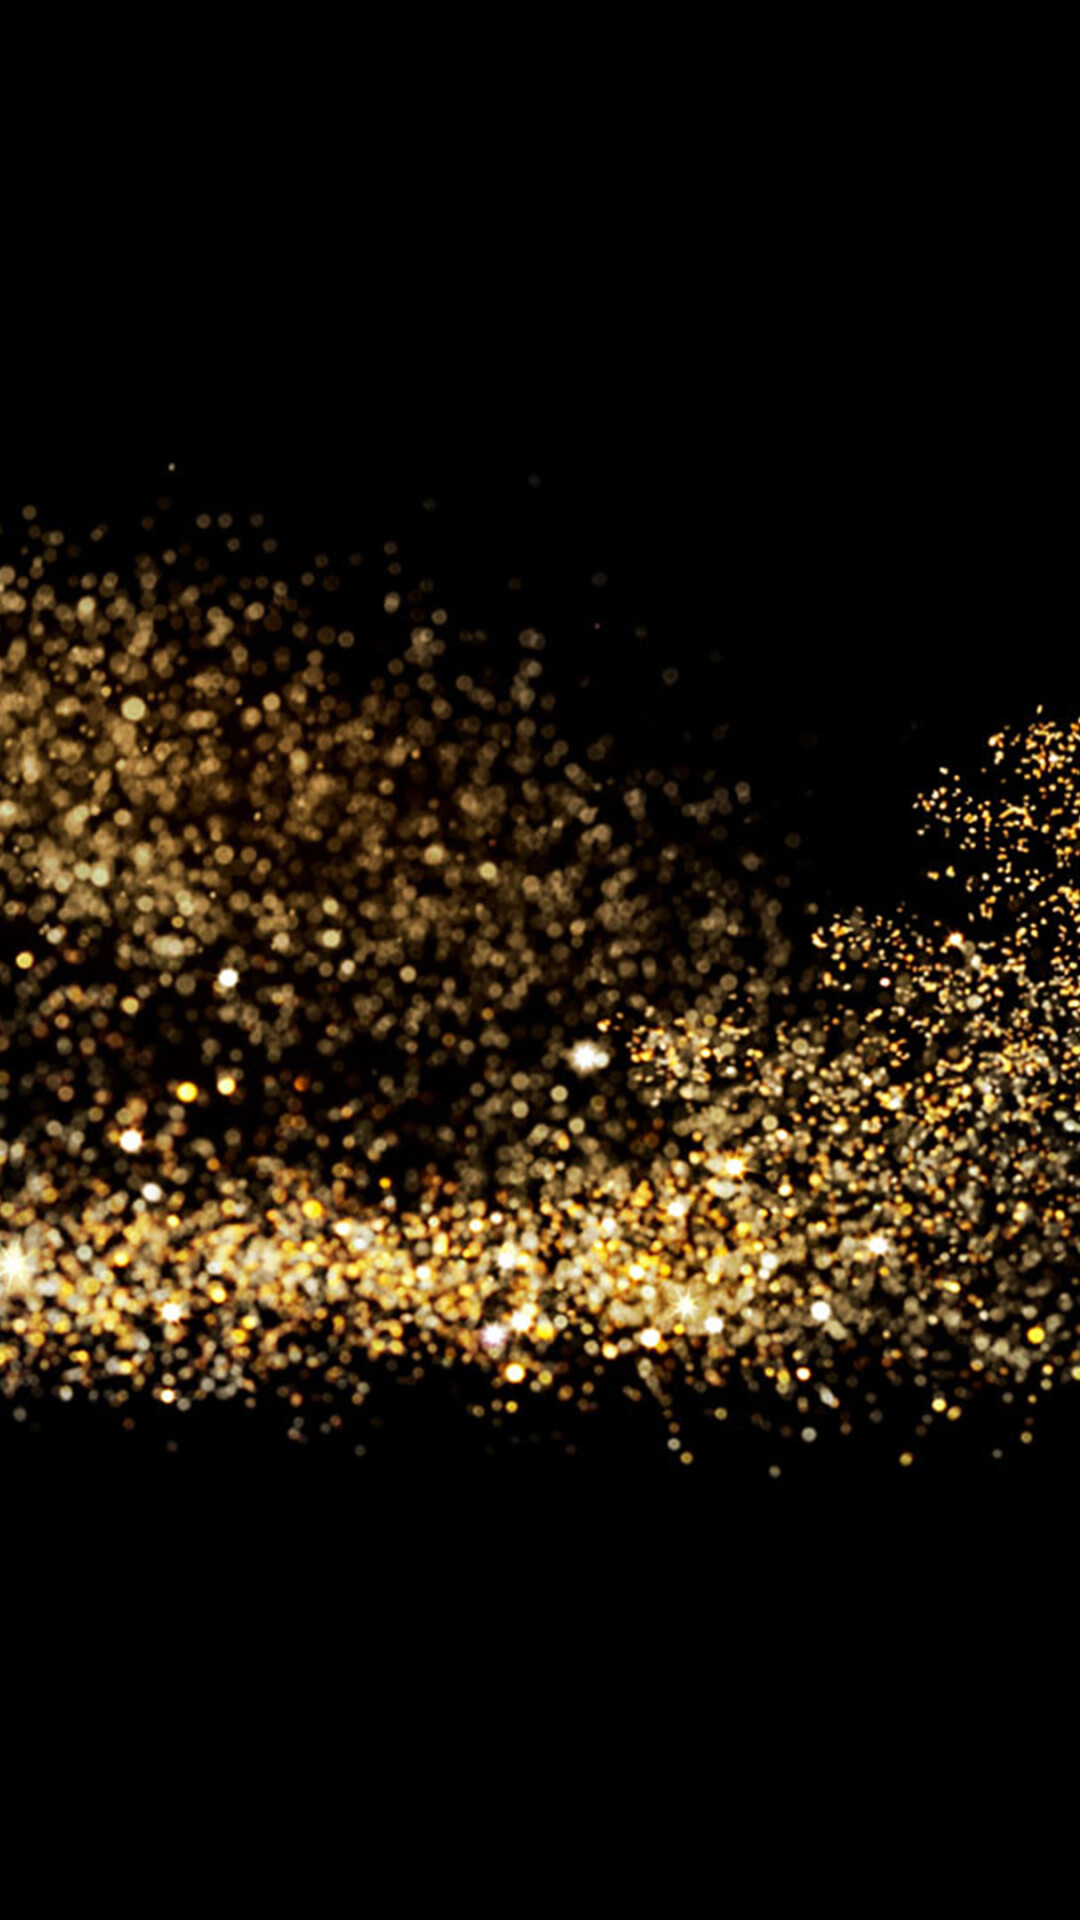 Gold Sparkle: Golden powder scattered on a black background, An assortment of small gold particles. 1080x1920 Full HD Wallpaper.